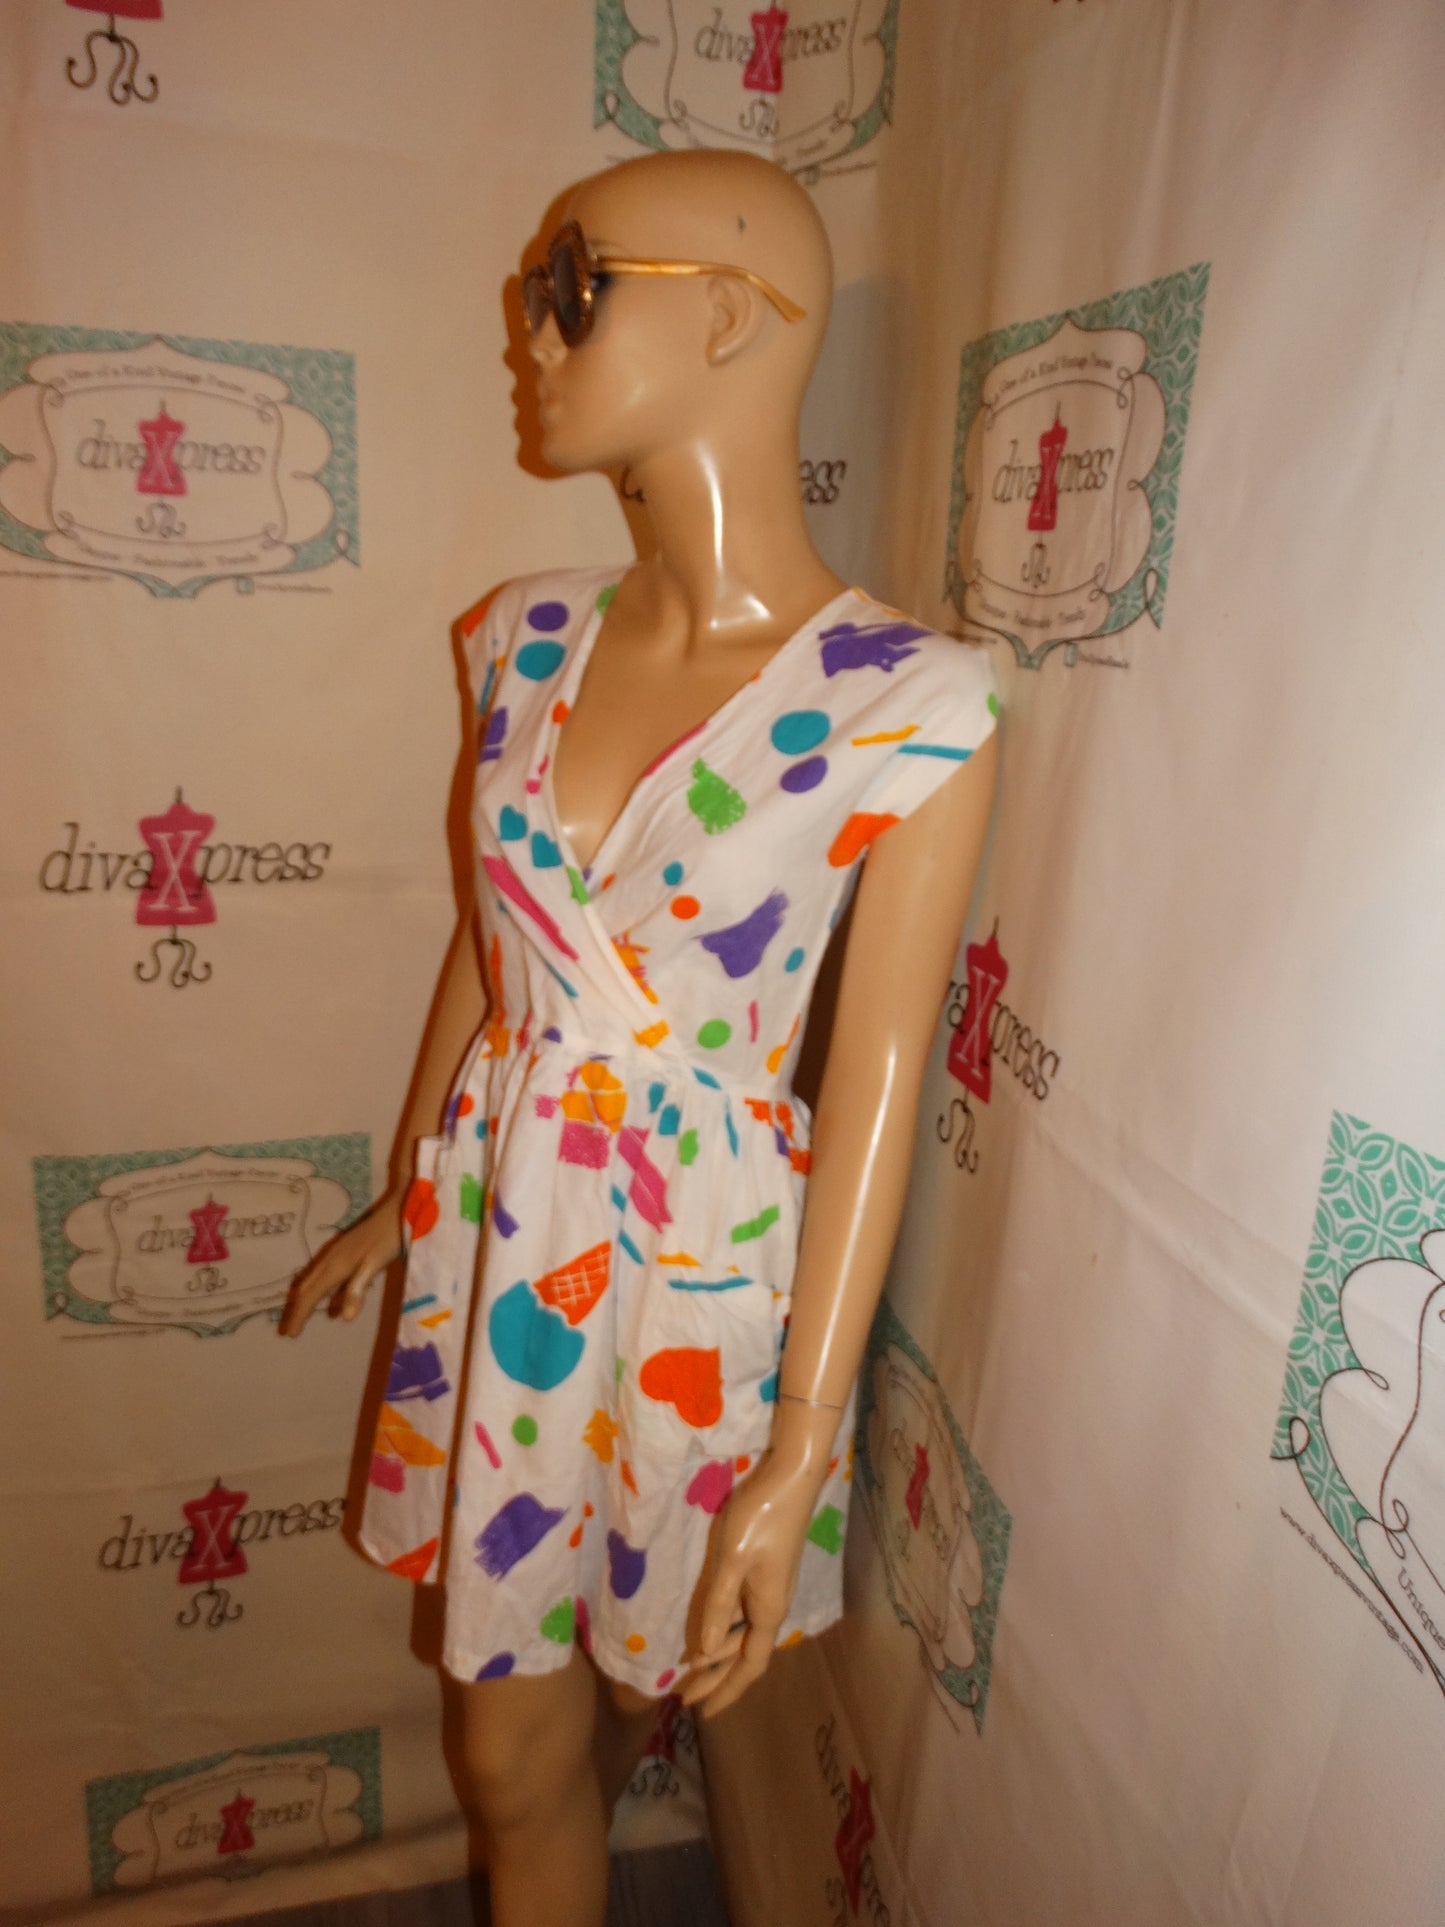 Vintage OP White Colorful Dress Size S